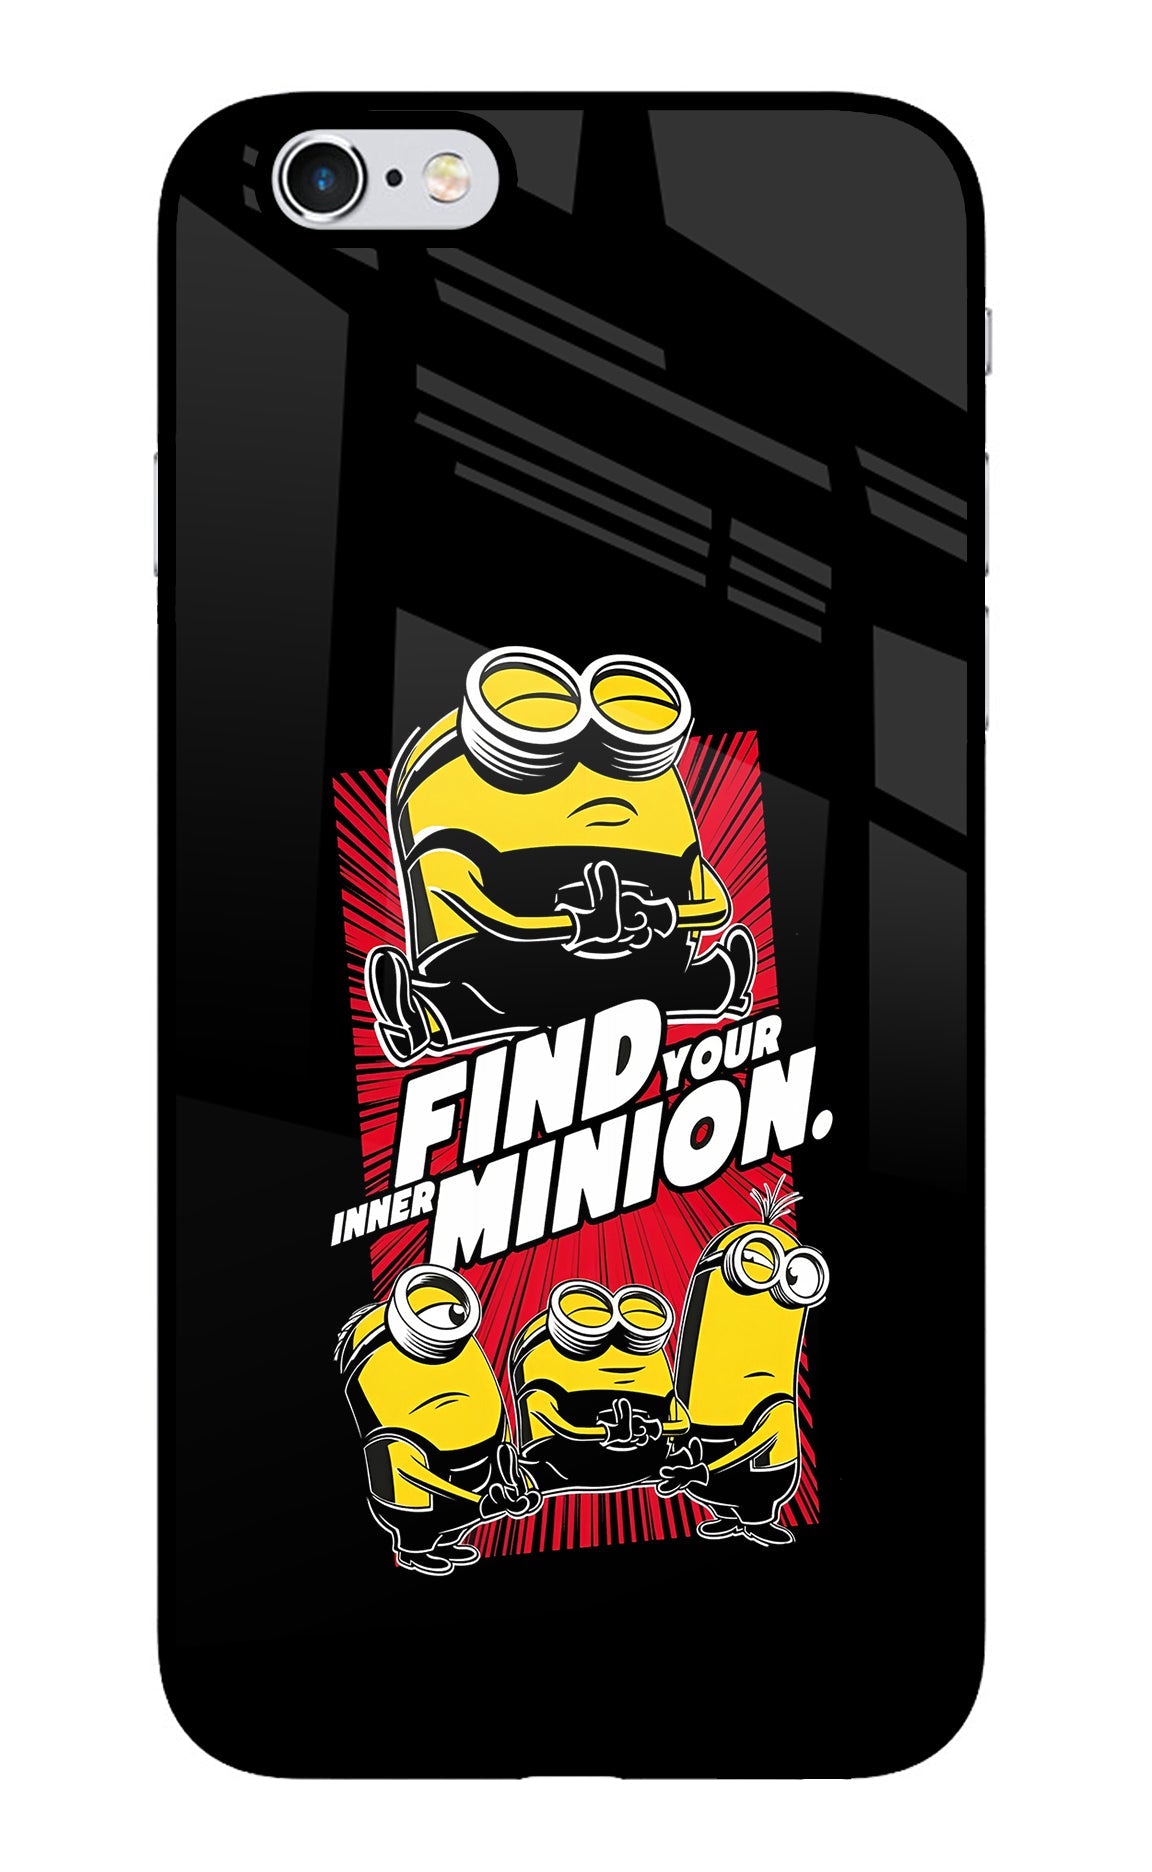 Find your inner Minion iPhone 6/6s Glass Case